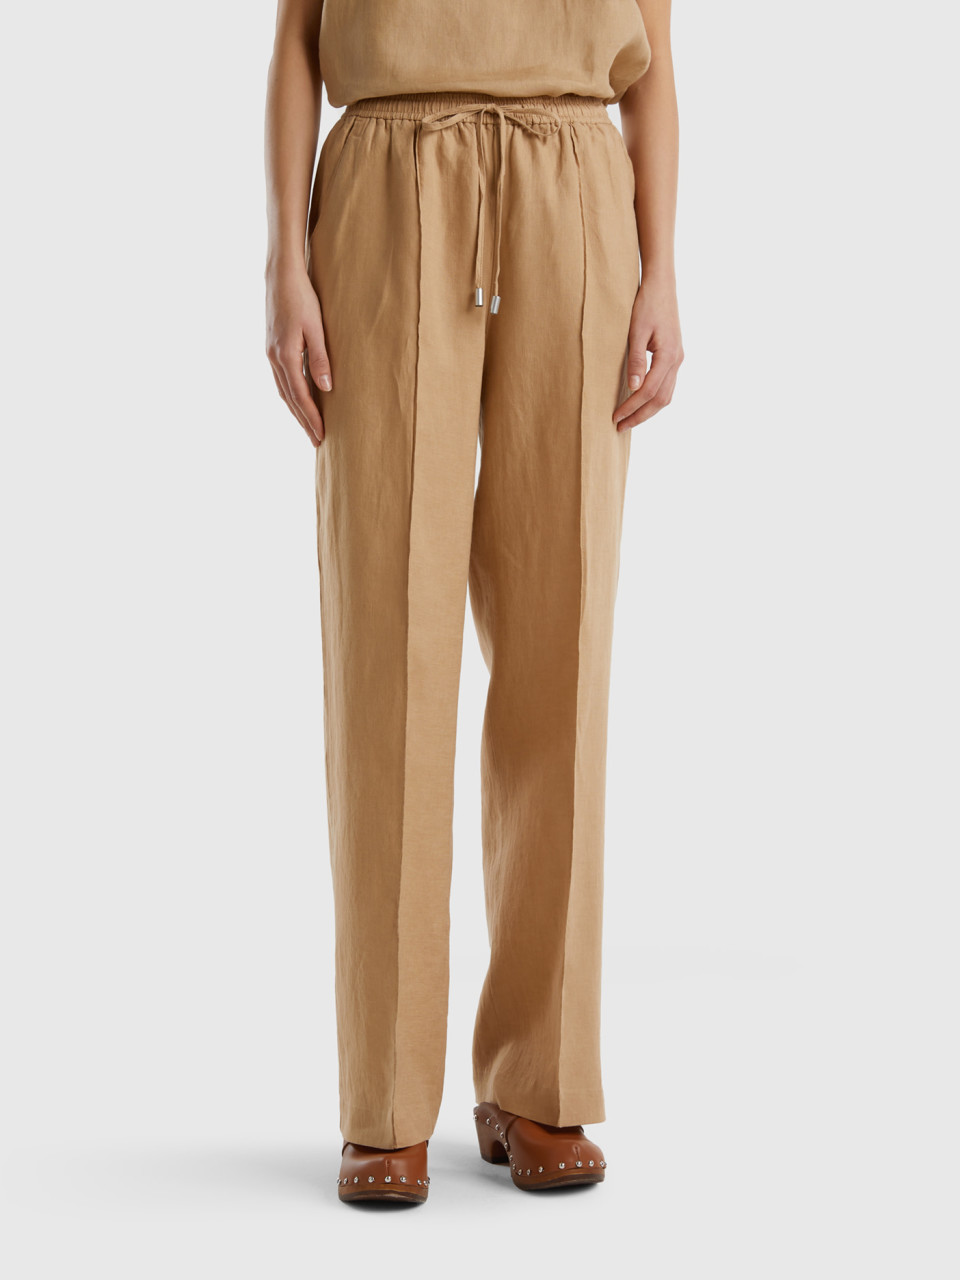 Benetton, Trousers In Pure Linen With Elastic, Camel, Women